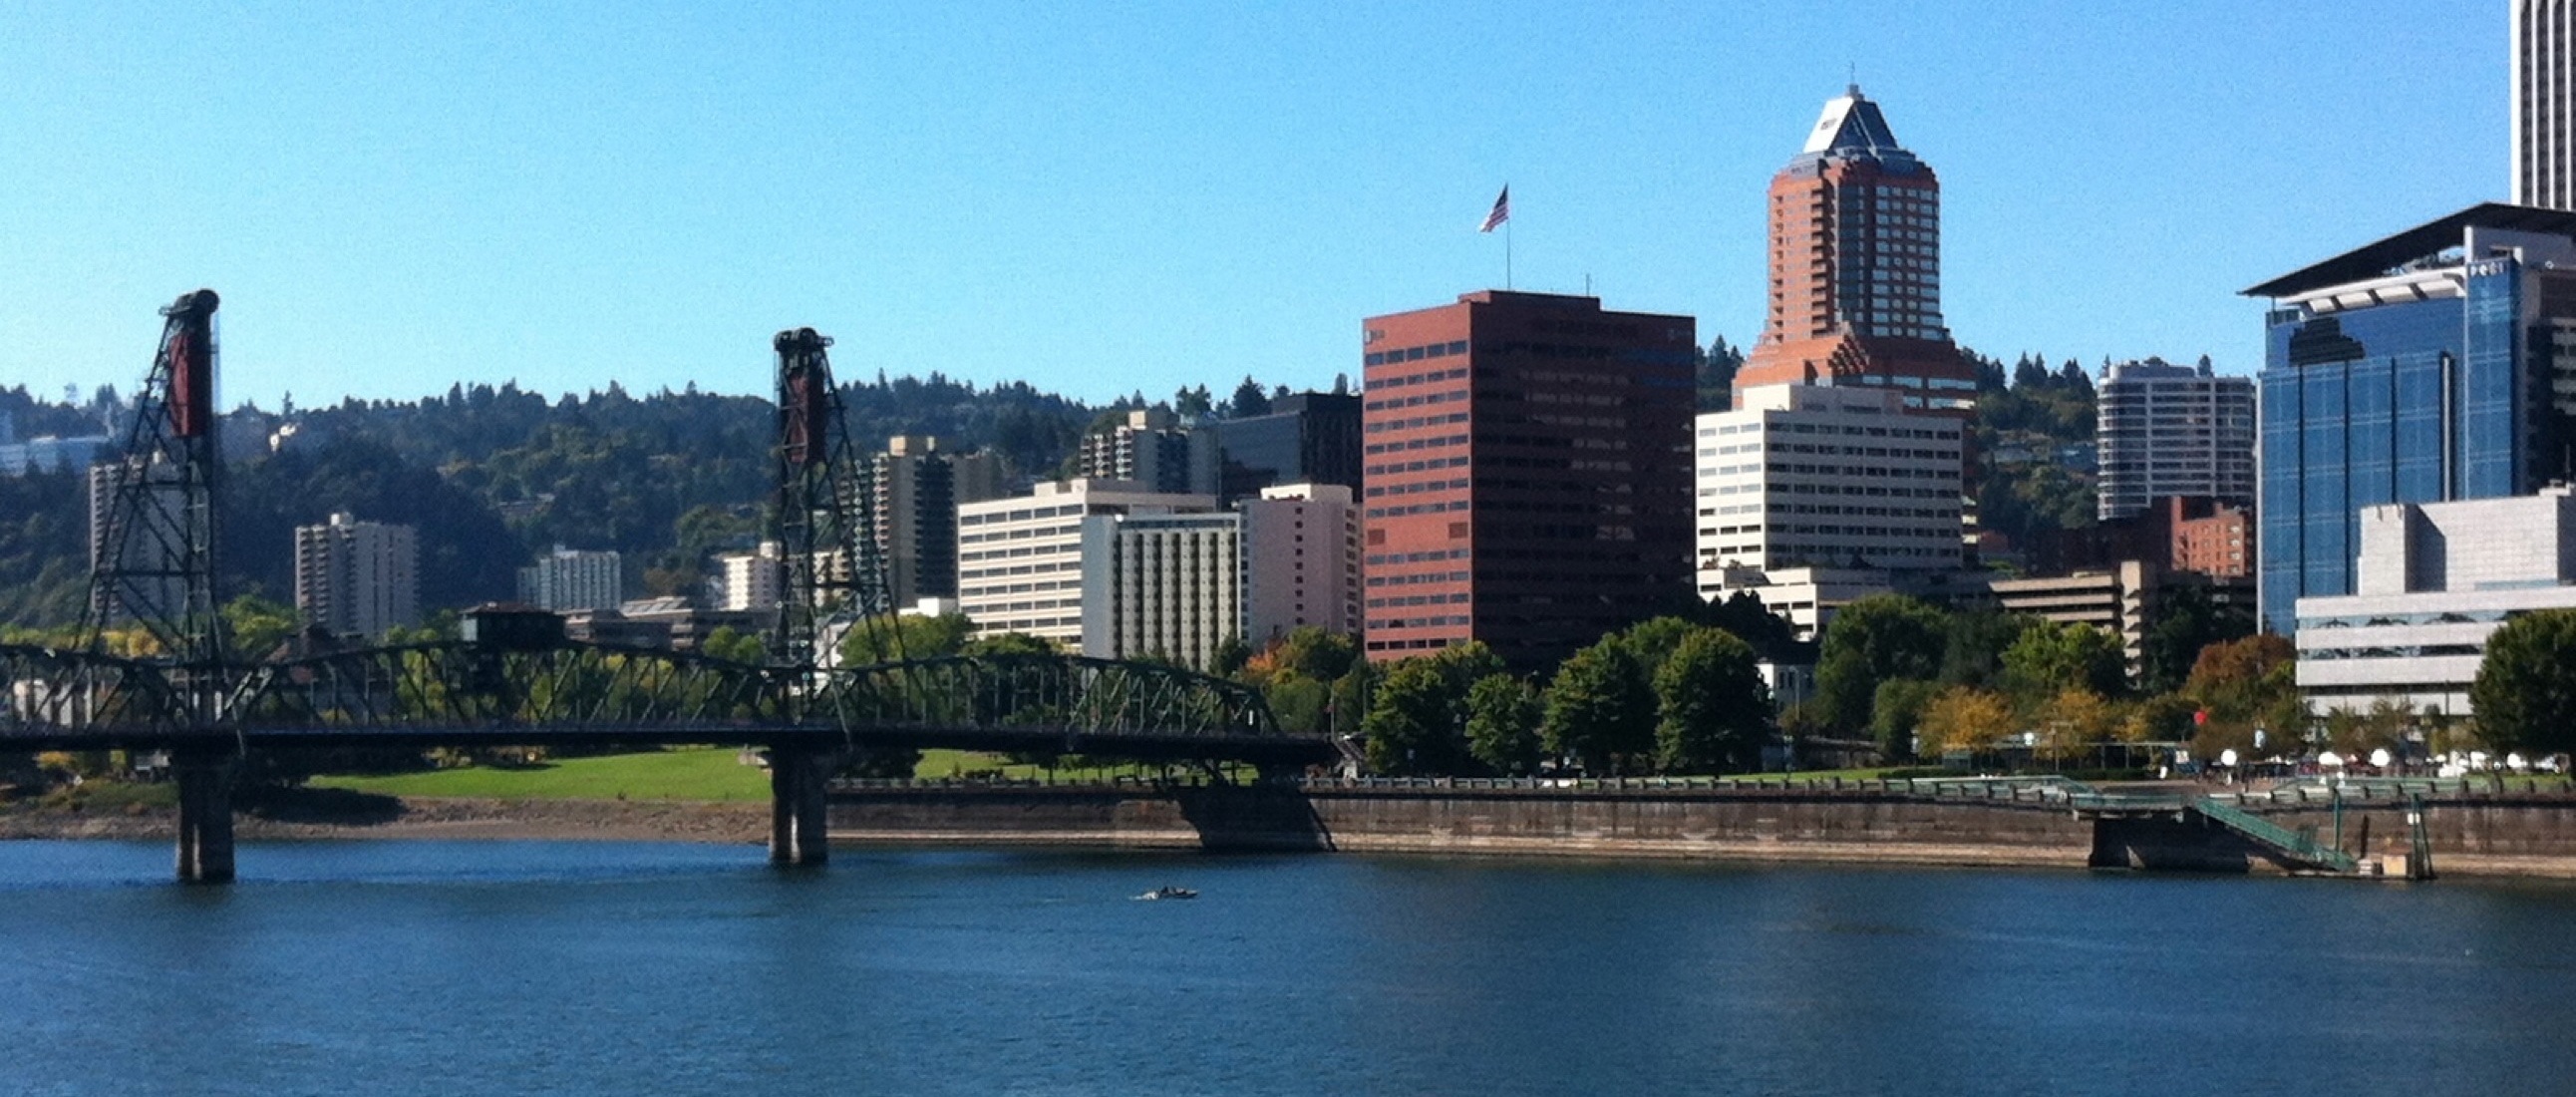 Photo of the Willamette River and downtown Portland